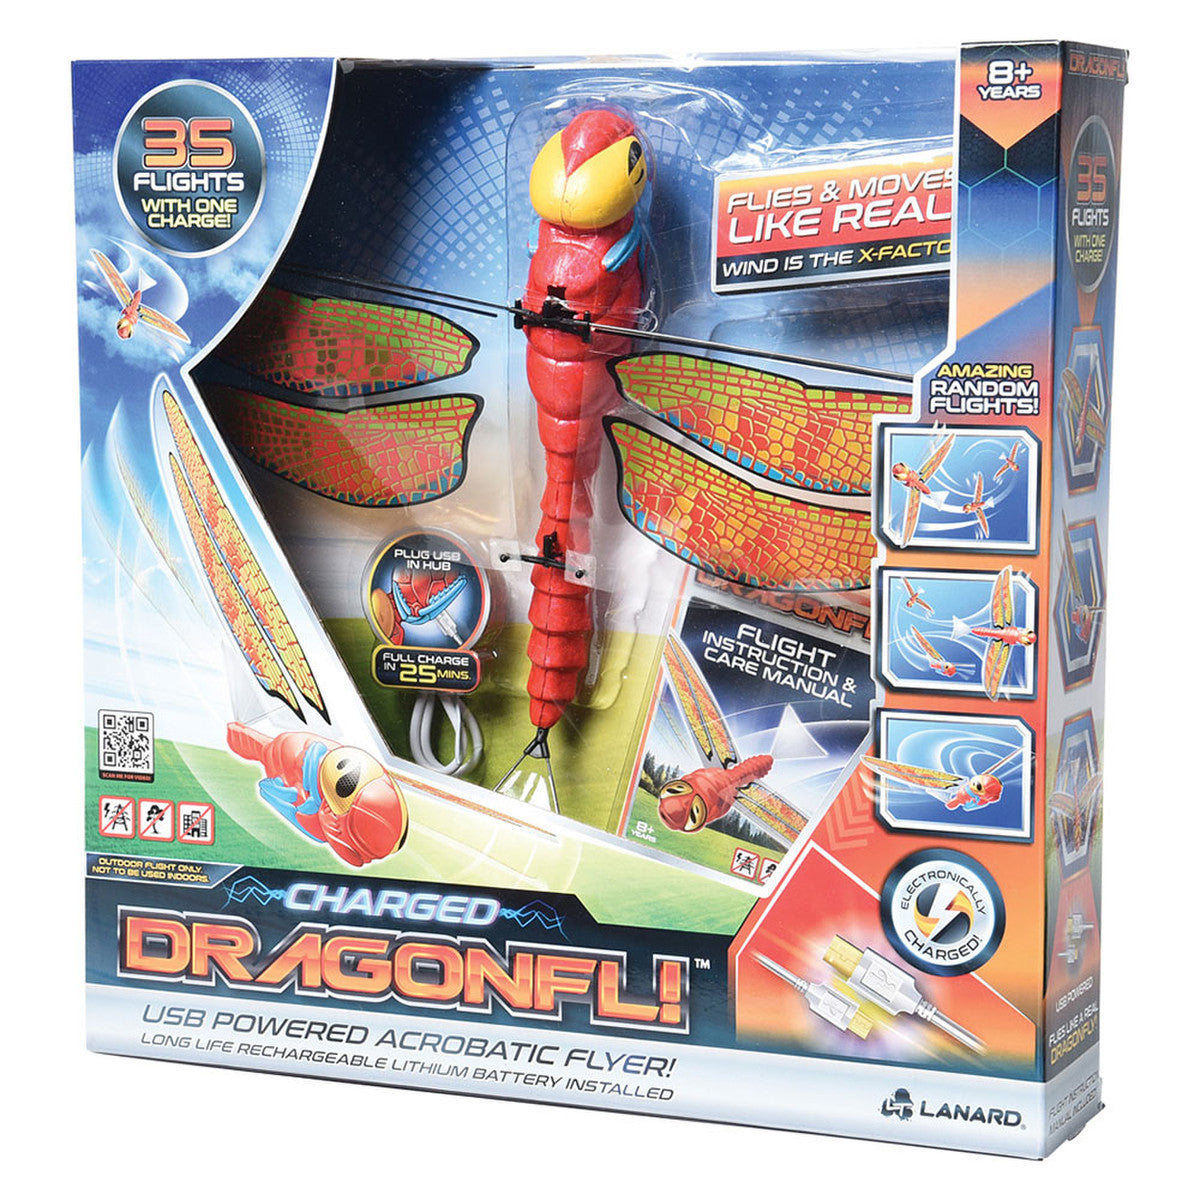 Charged Dragonfl!